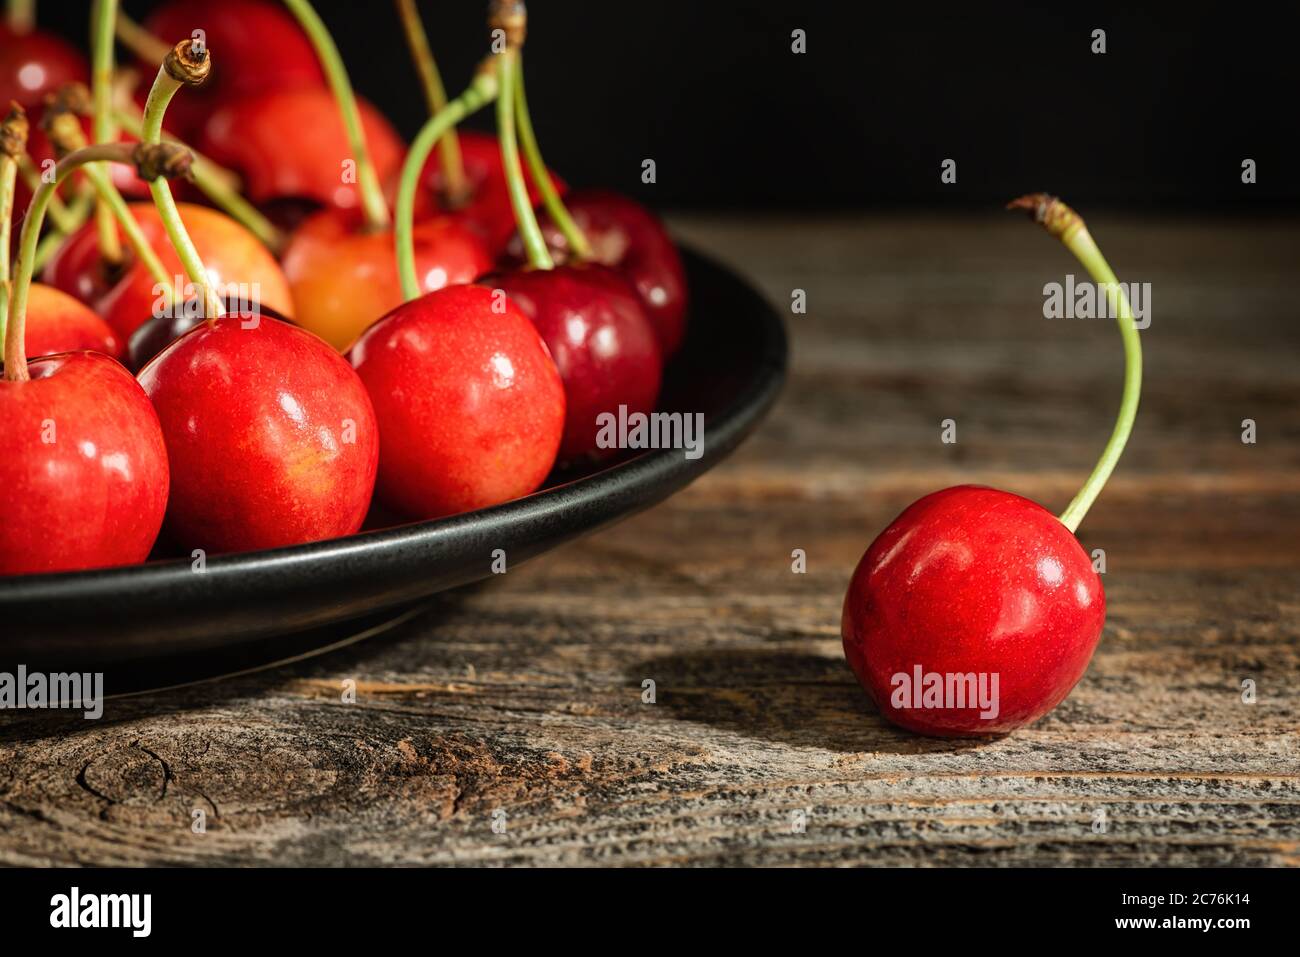 Sweet cherries on a plate on a wooden surface. Low key. Stock Photo